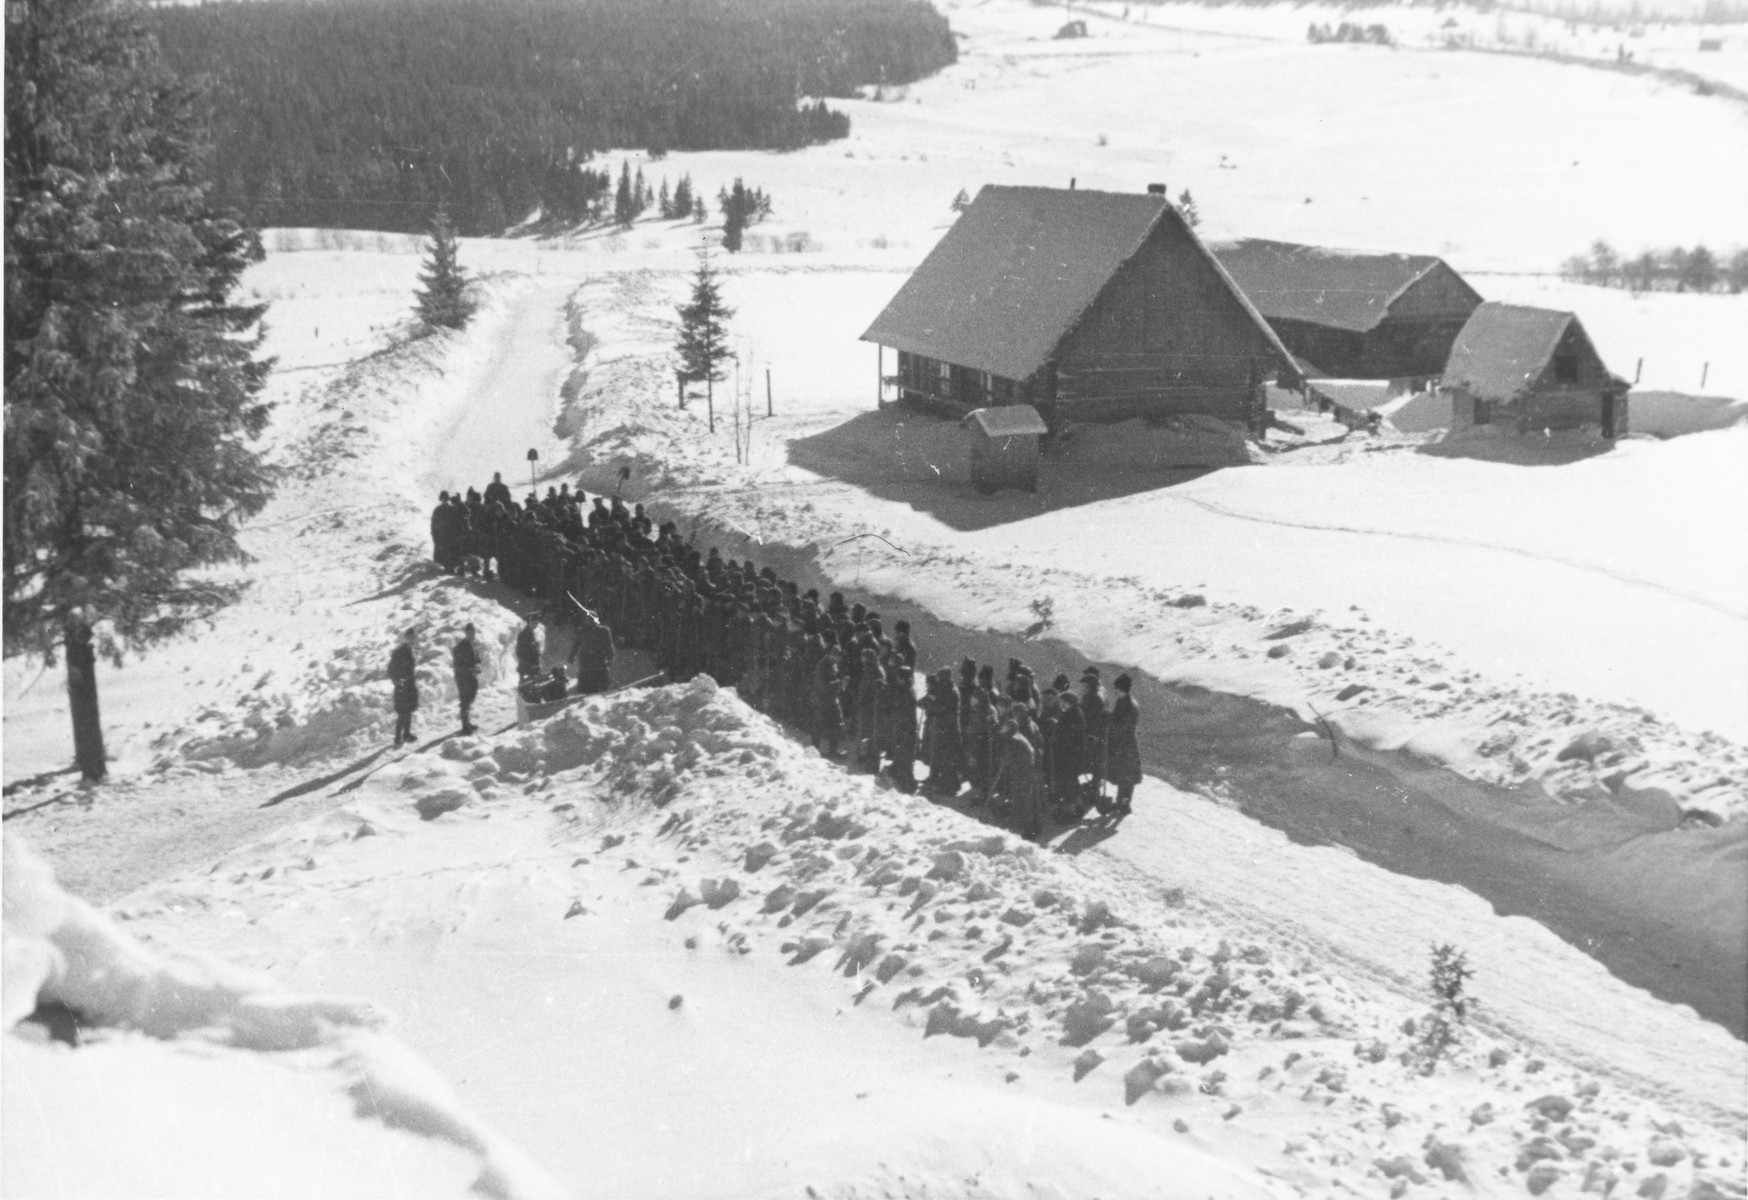 Jewish conscripts in Company 108/57 of the Hungarian Labor Service assembled for work clearing snow from roads.